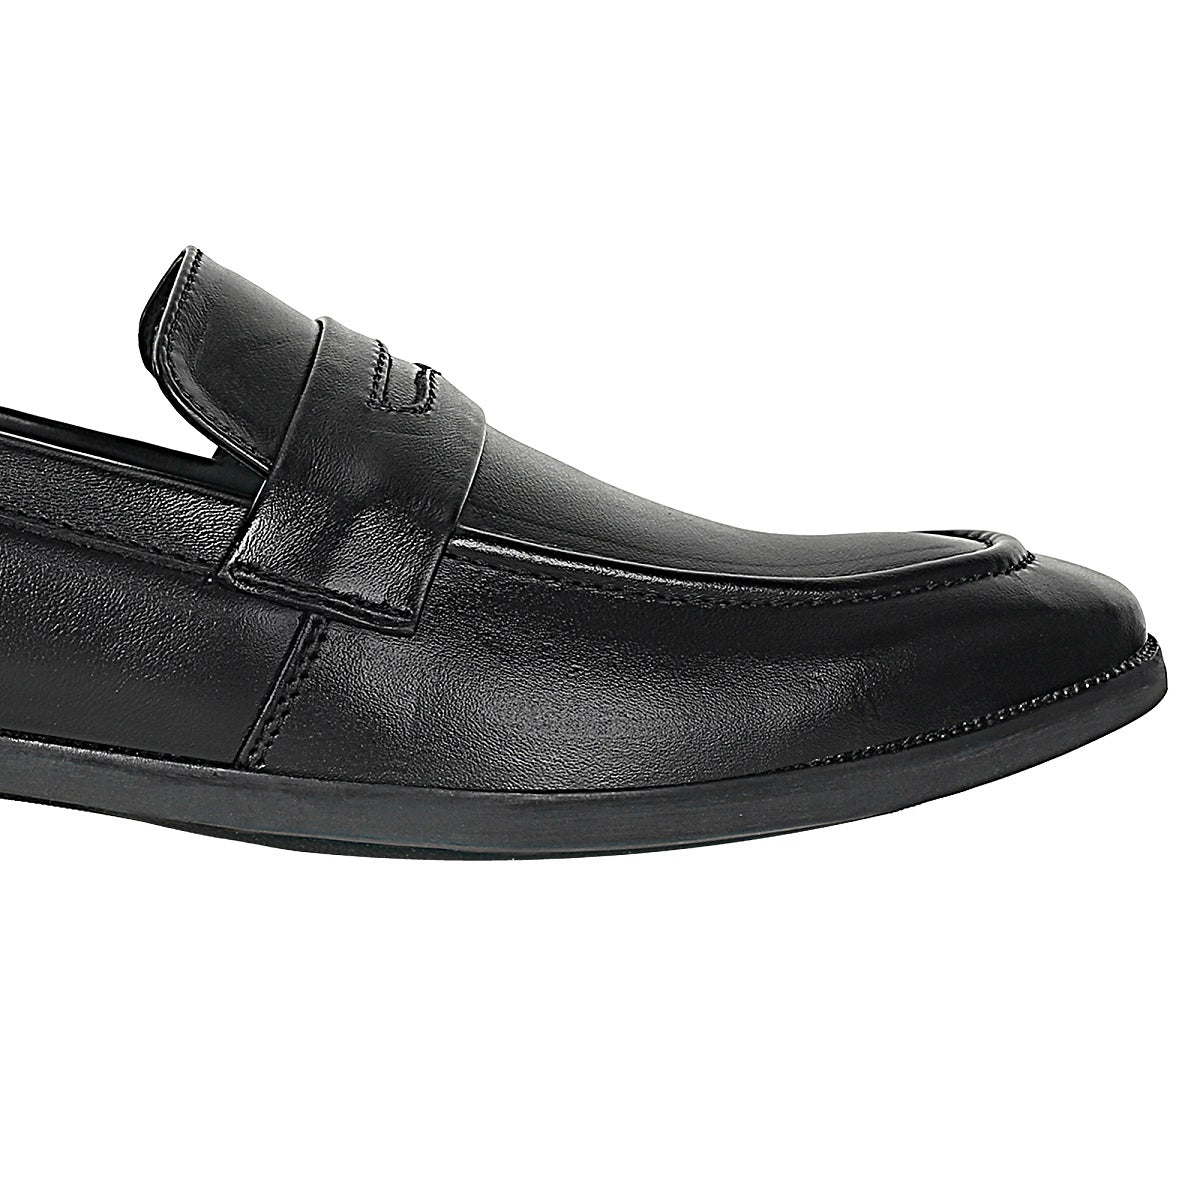 Penny Leather Loafers for Men Minor-Defect